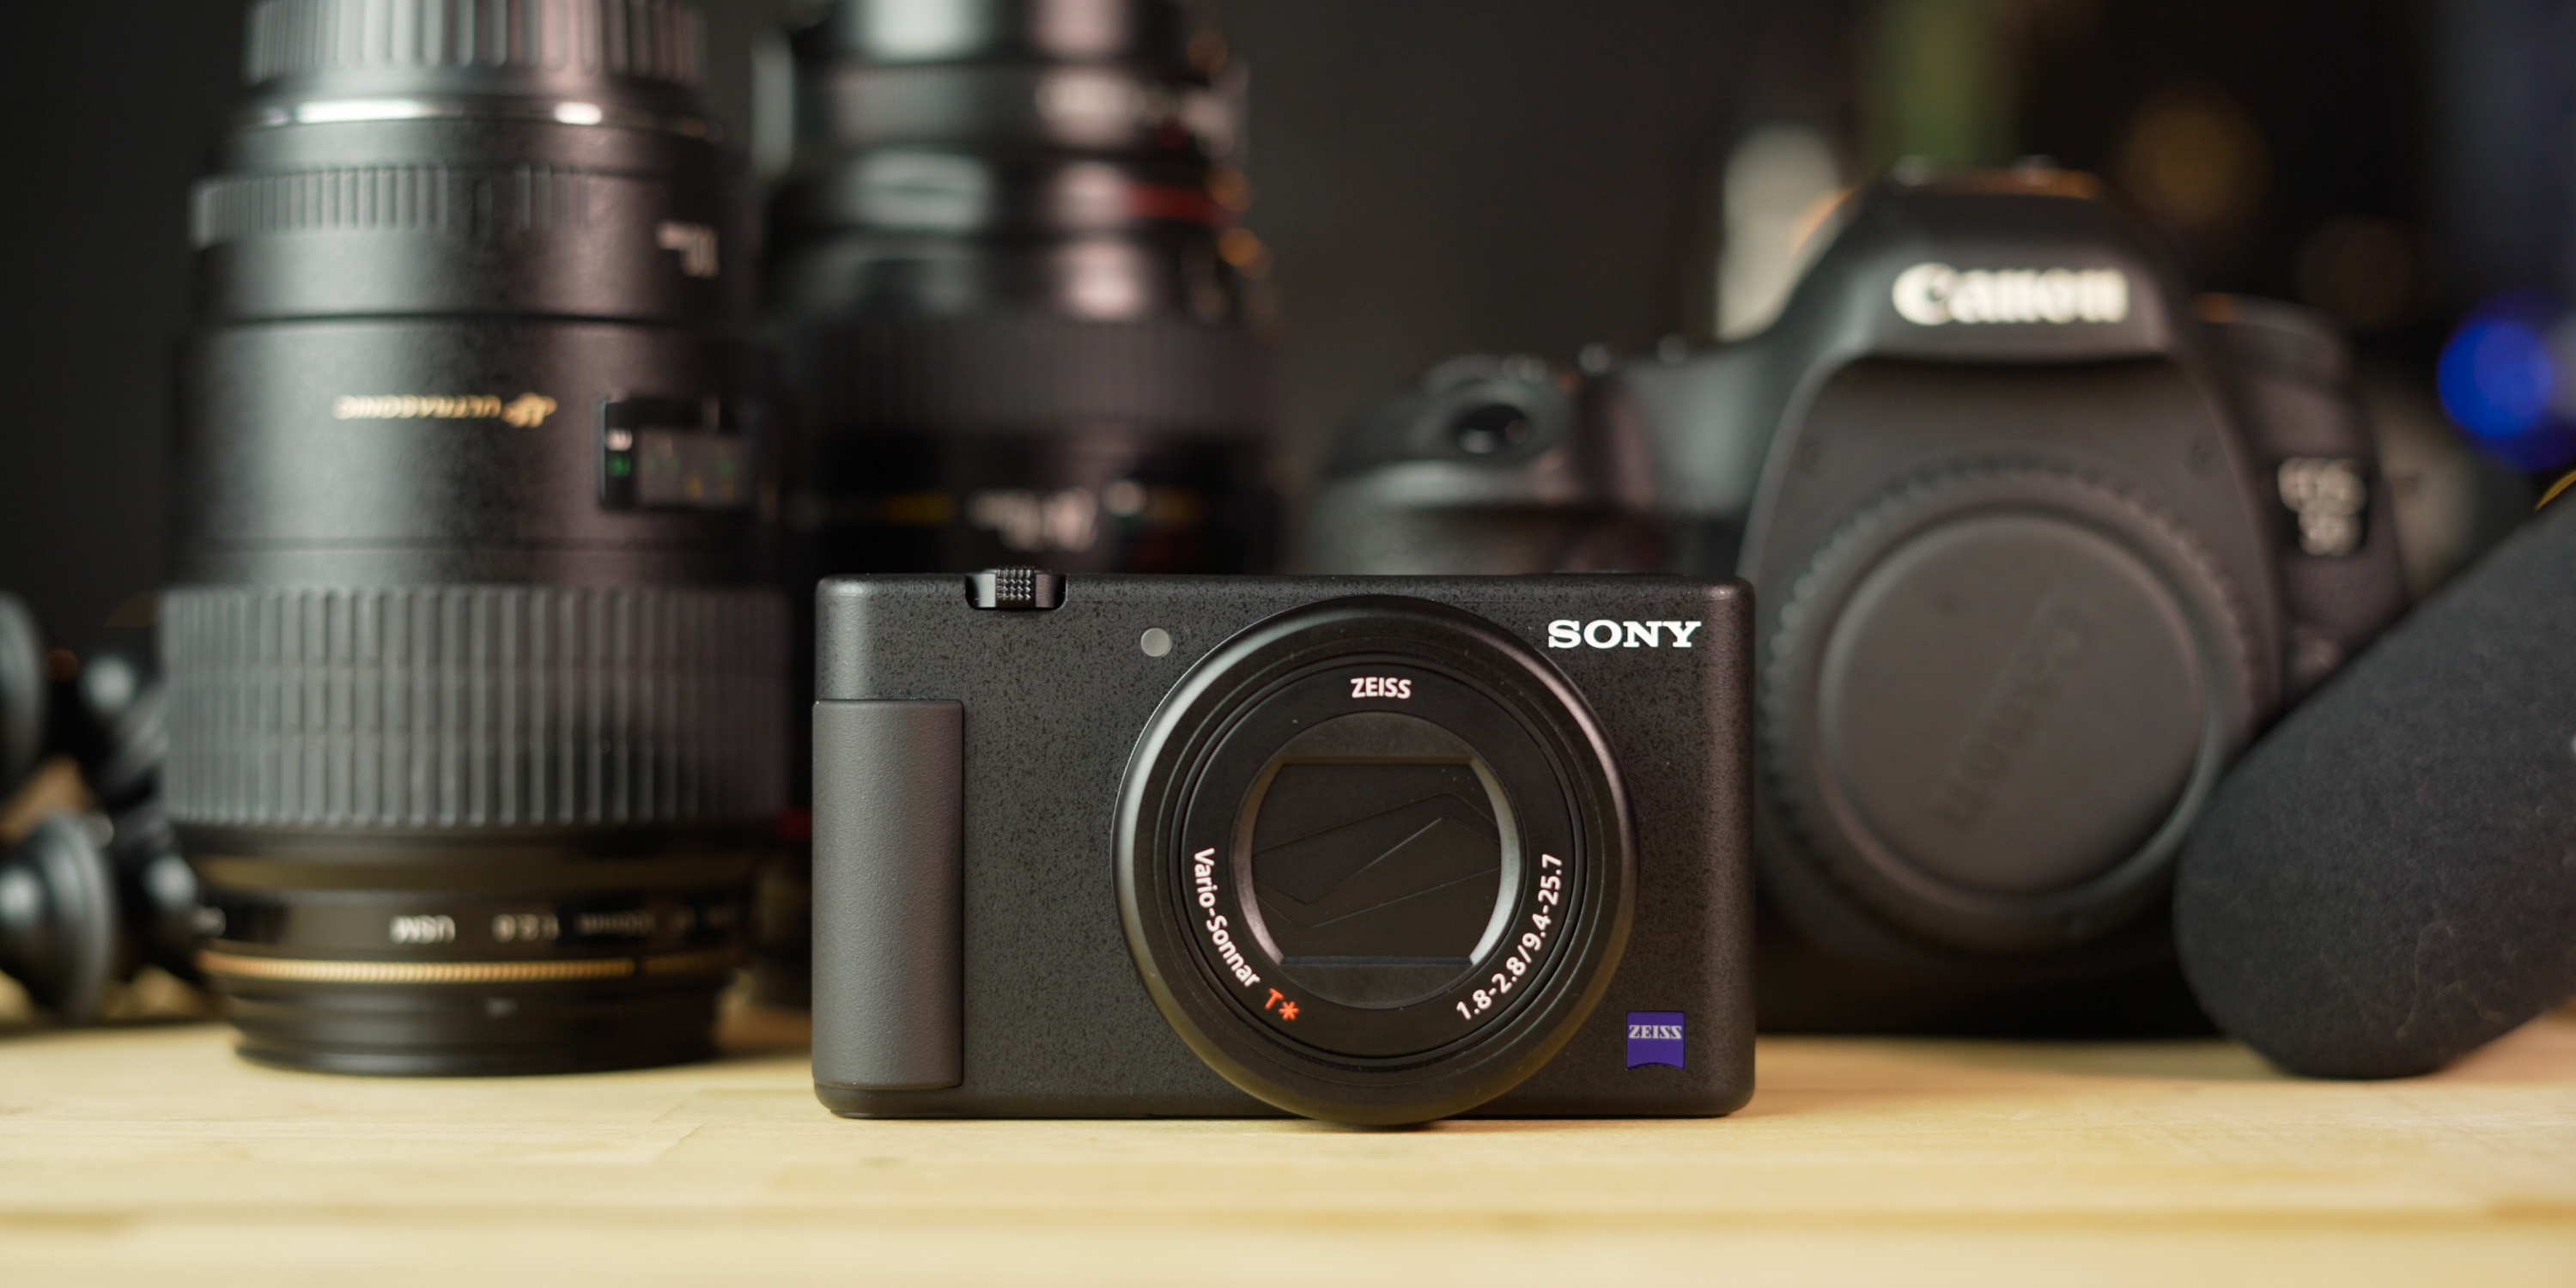 Sony ZV-1 sitting in front of other larger cameras and accessories